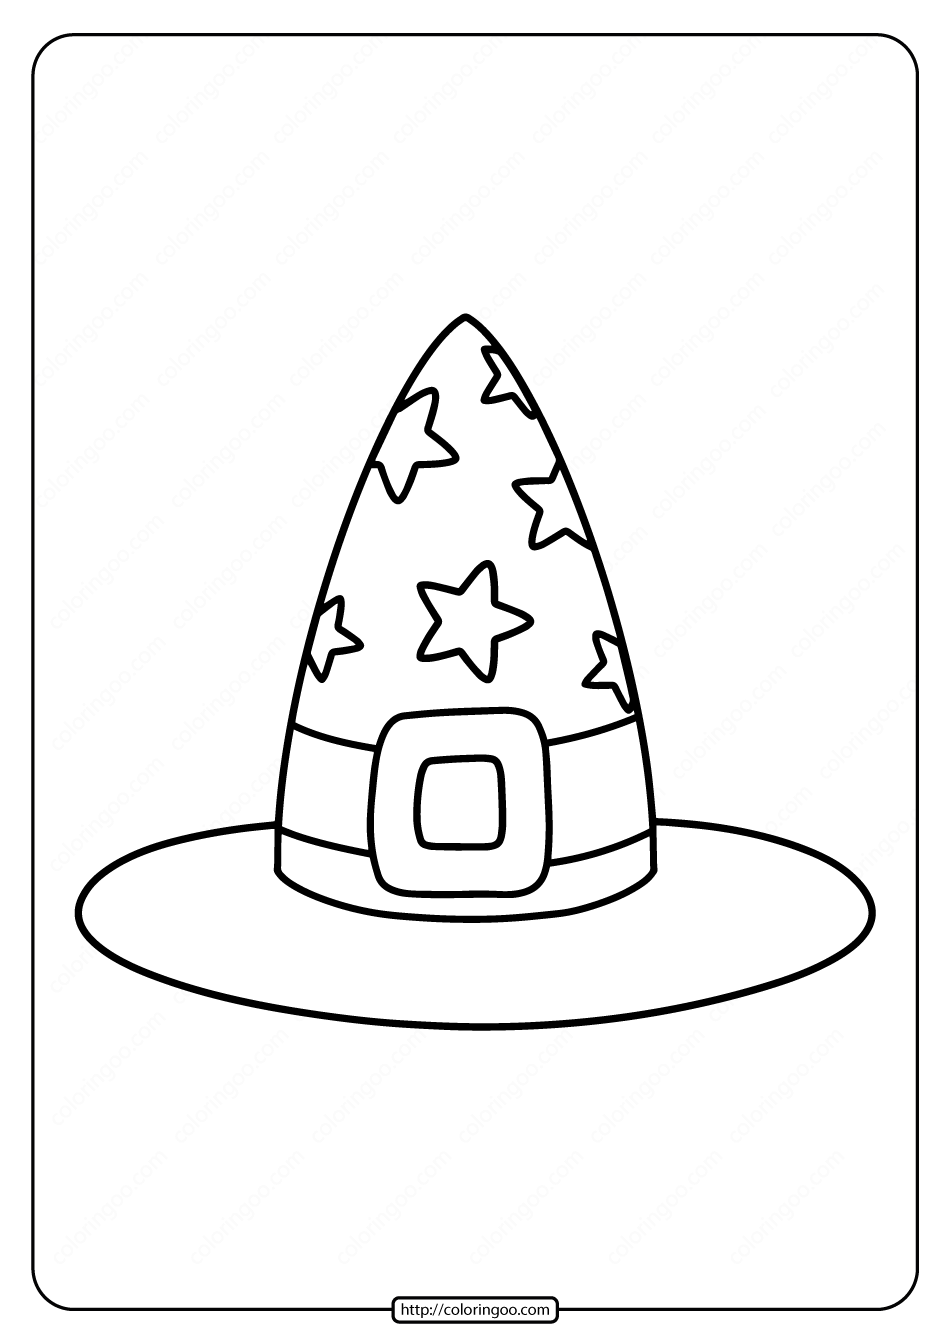 Free printable witchs hat coloring pages witch hat coloring pages halloween coloring pages